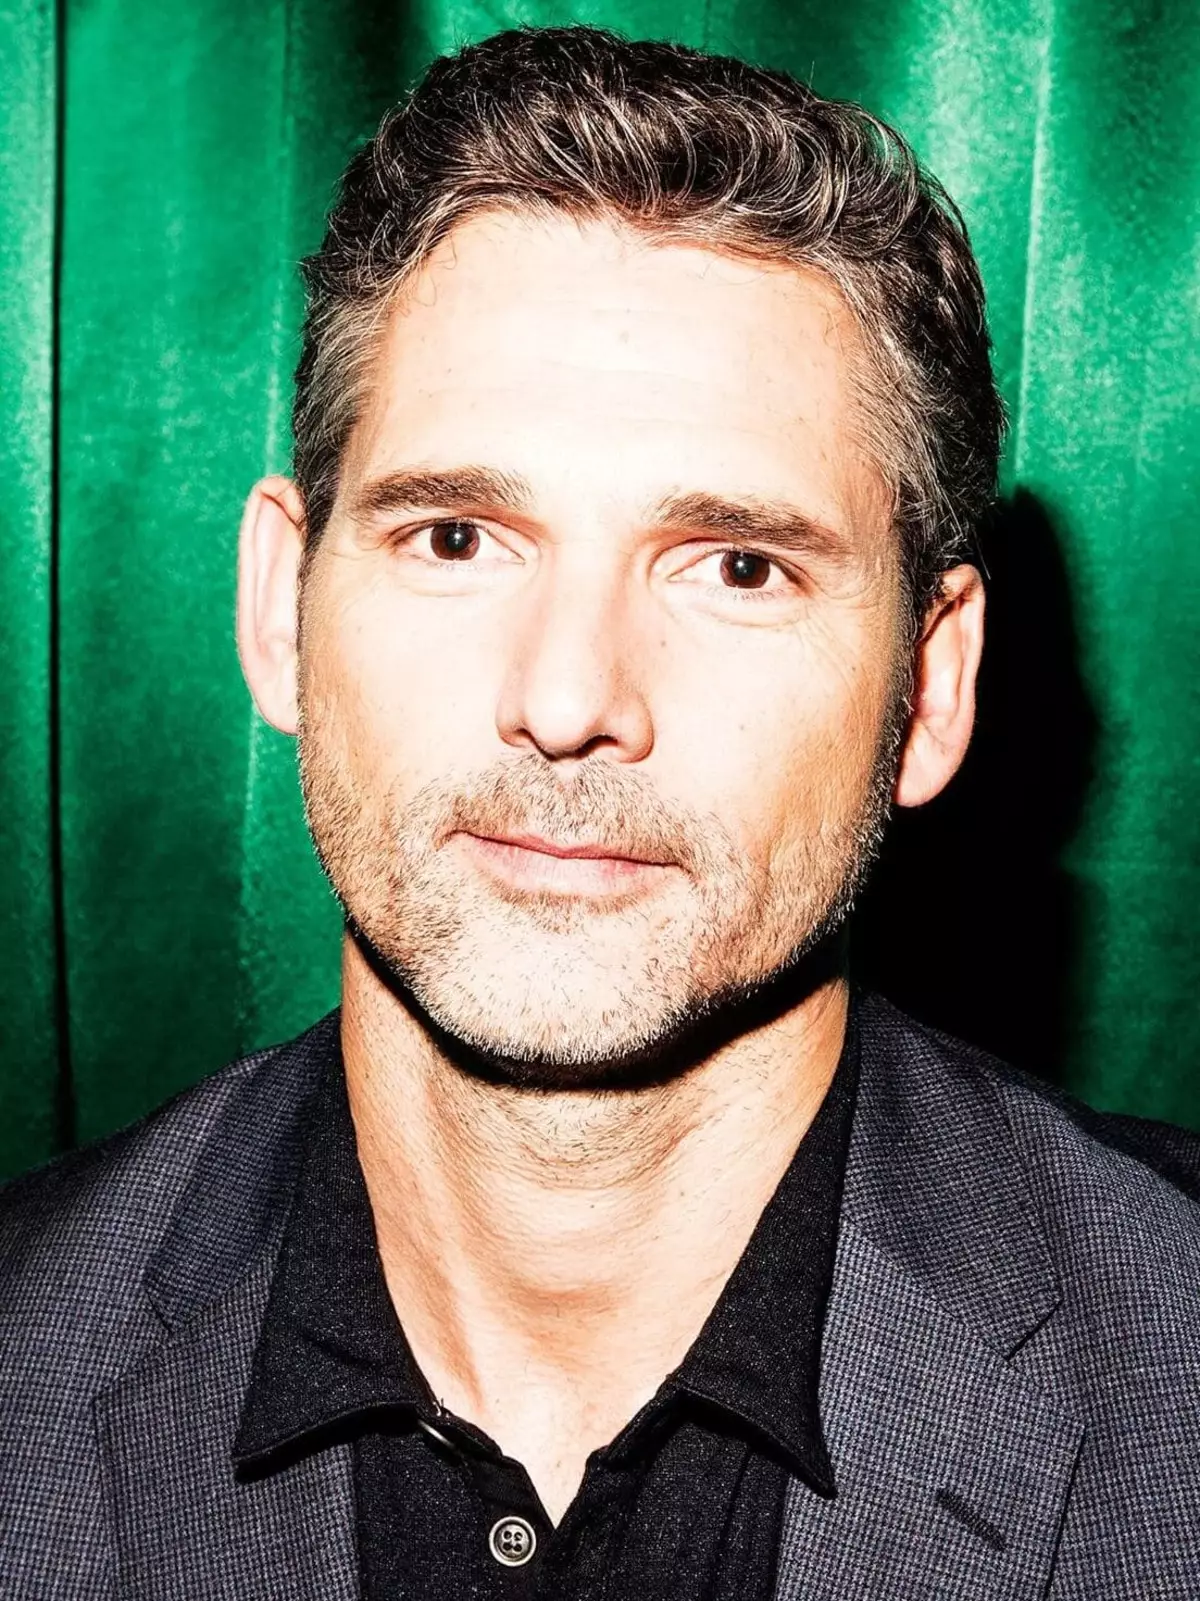 Eric Bana - Biography, Personal Life, Photo, News, Films, Filmography, Actor, Wife, Children, Roles 2021